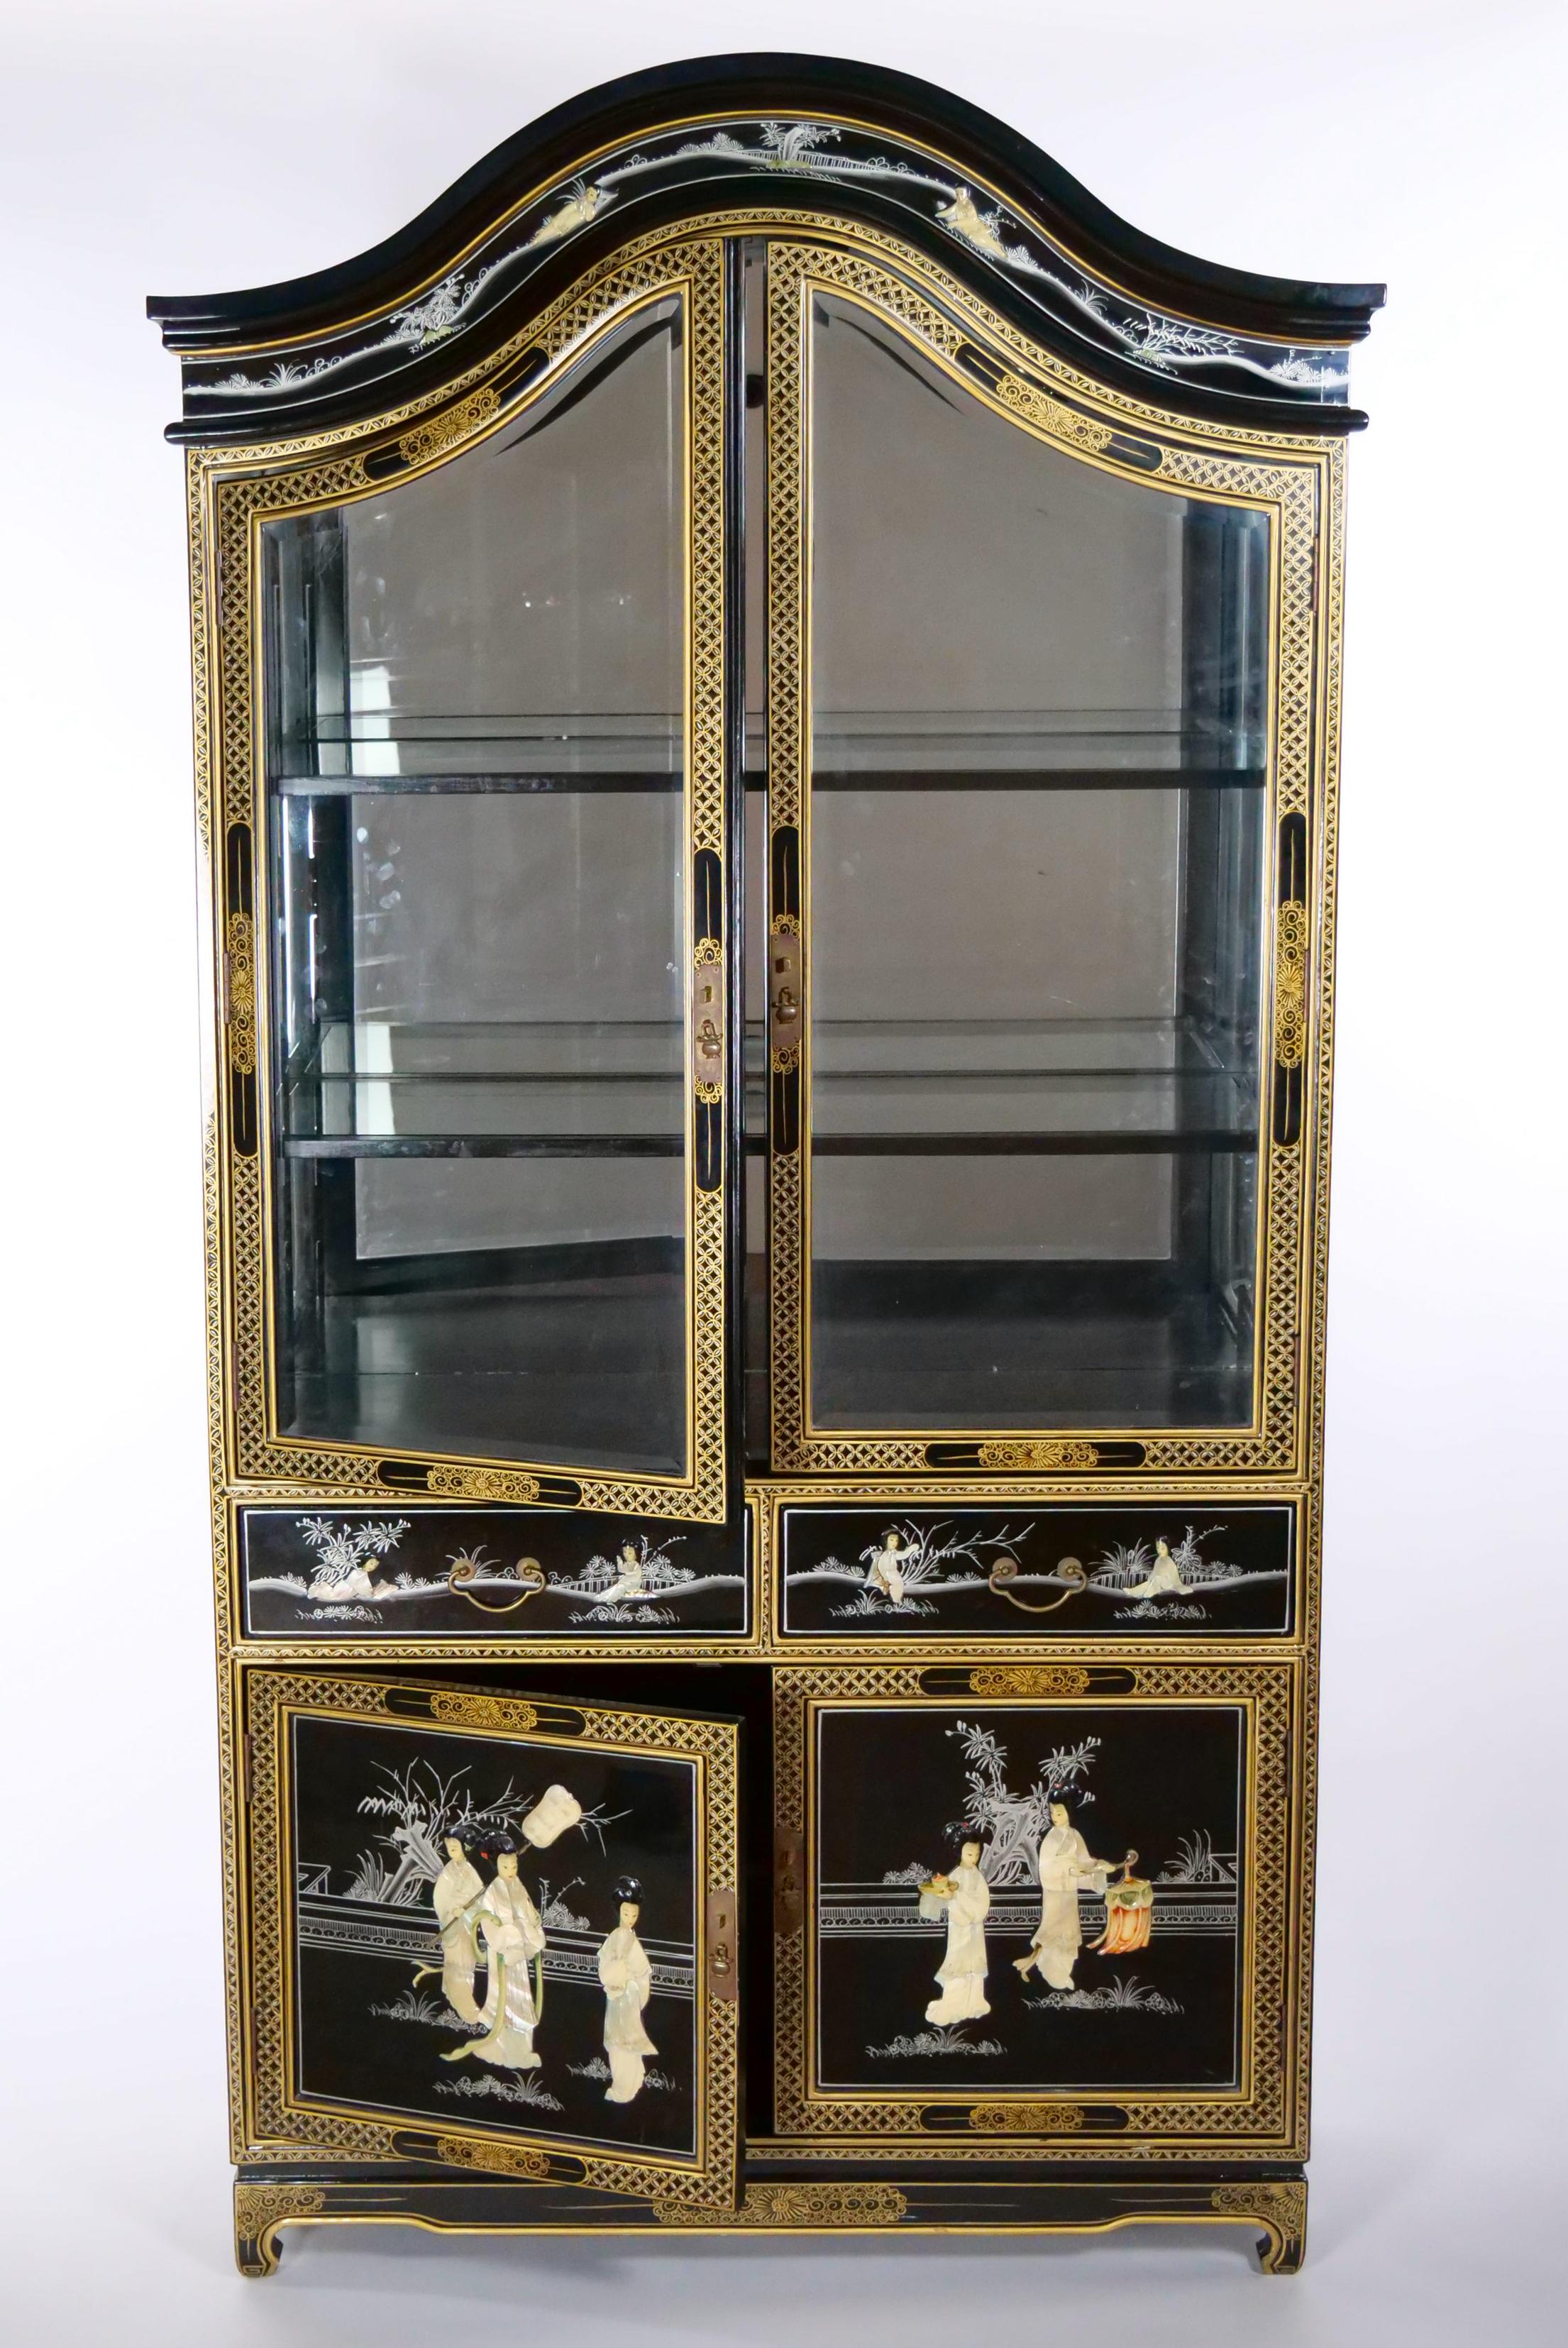 Beautifully hand painted and decorated black lacquered giltwood chinoiserie scene detail display china cabinet. The cabinet / vitrine features a double top front door with two attached wood framed glass shelves resting on two pull front drawers